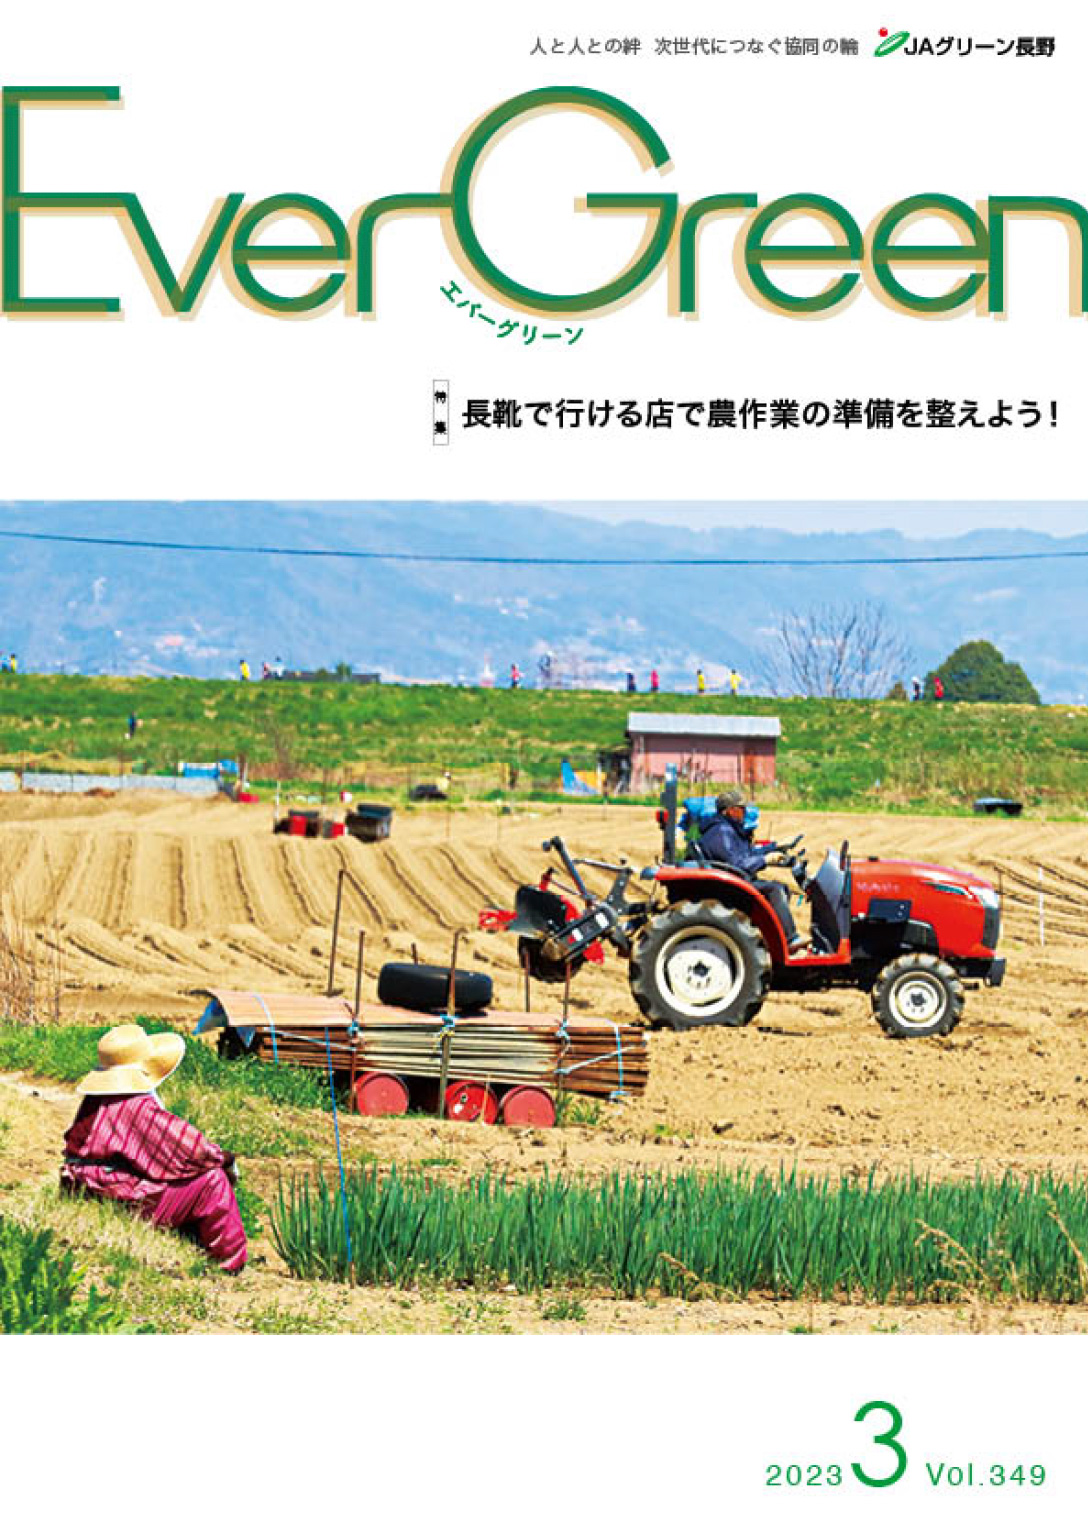 Ever Green3月号発行のご案内